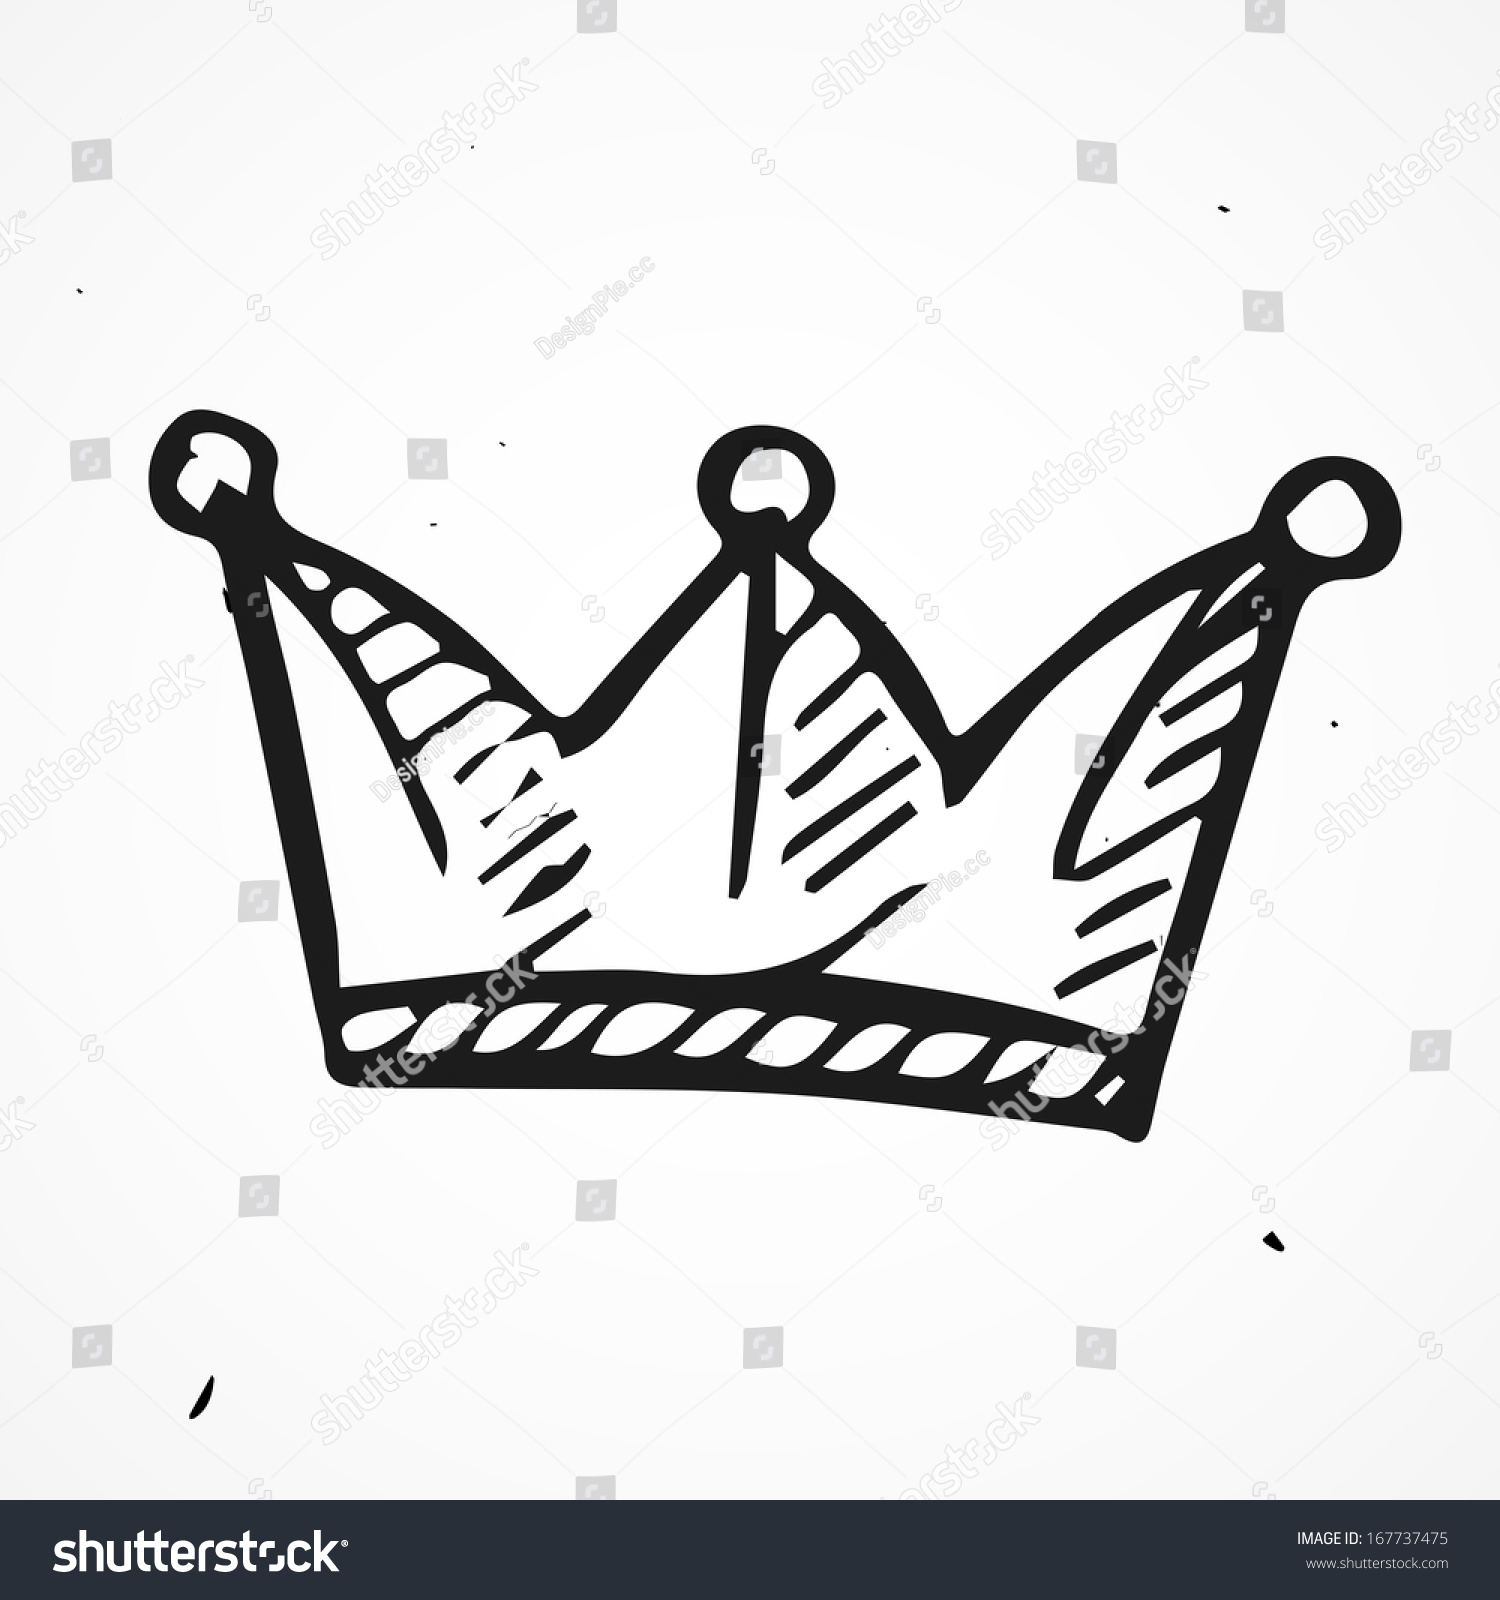 Simple Crown Icon Hand Drawn Stock Vector 167737475 - Shutterstock